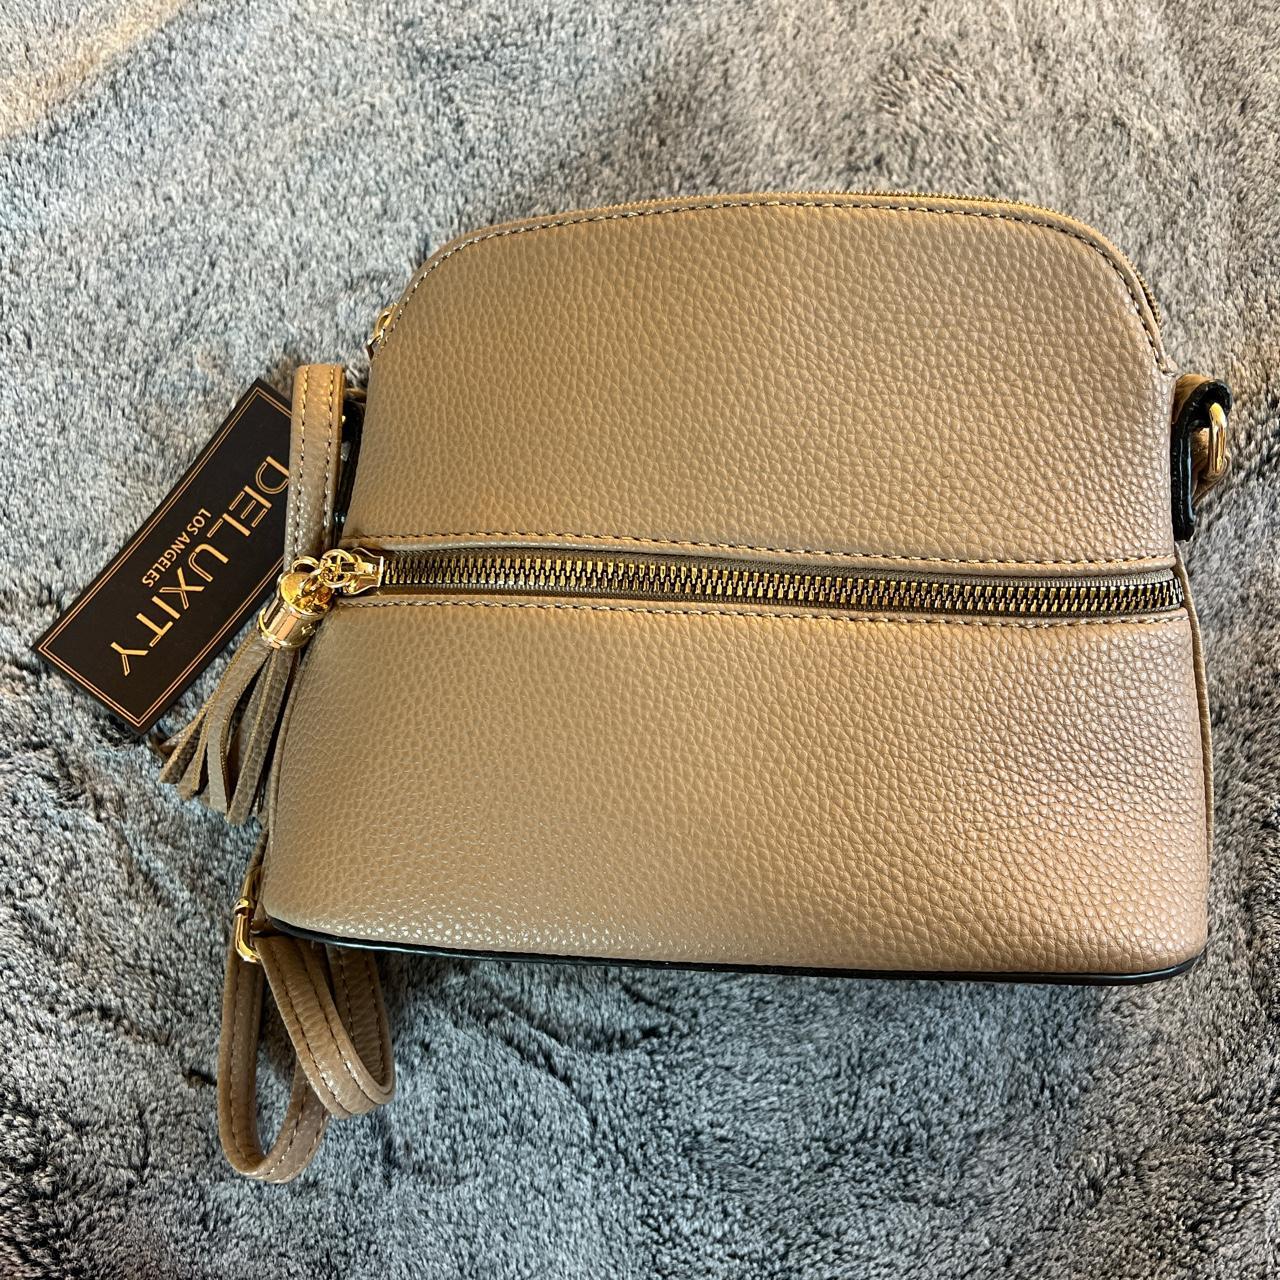 Light Brown, Real Leather Shoulder Purse - clothing & accessories - by  owner - apparel sale - craigslist